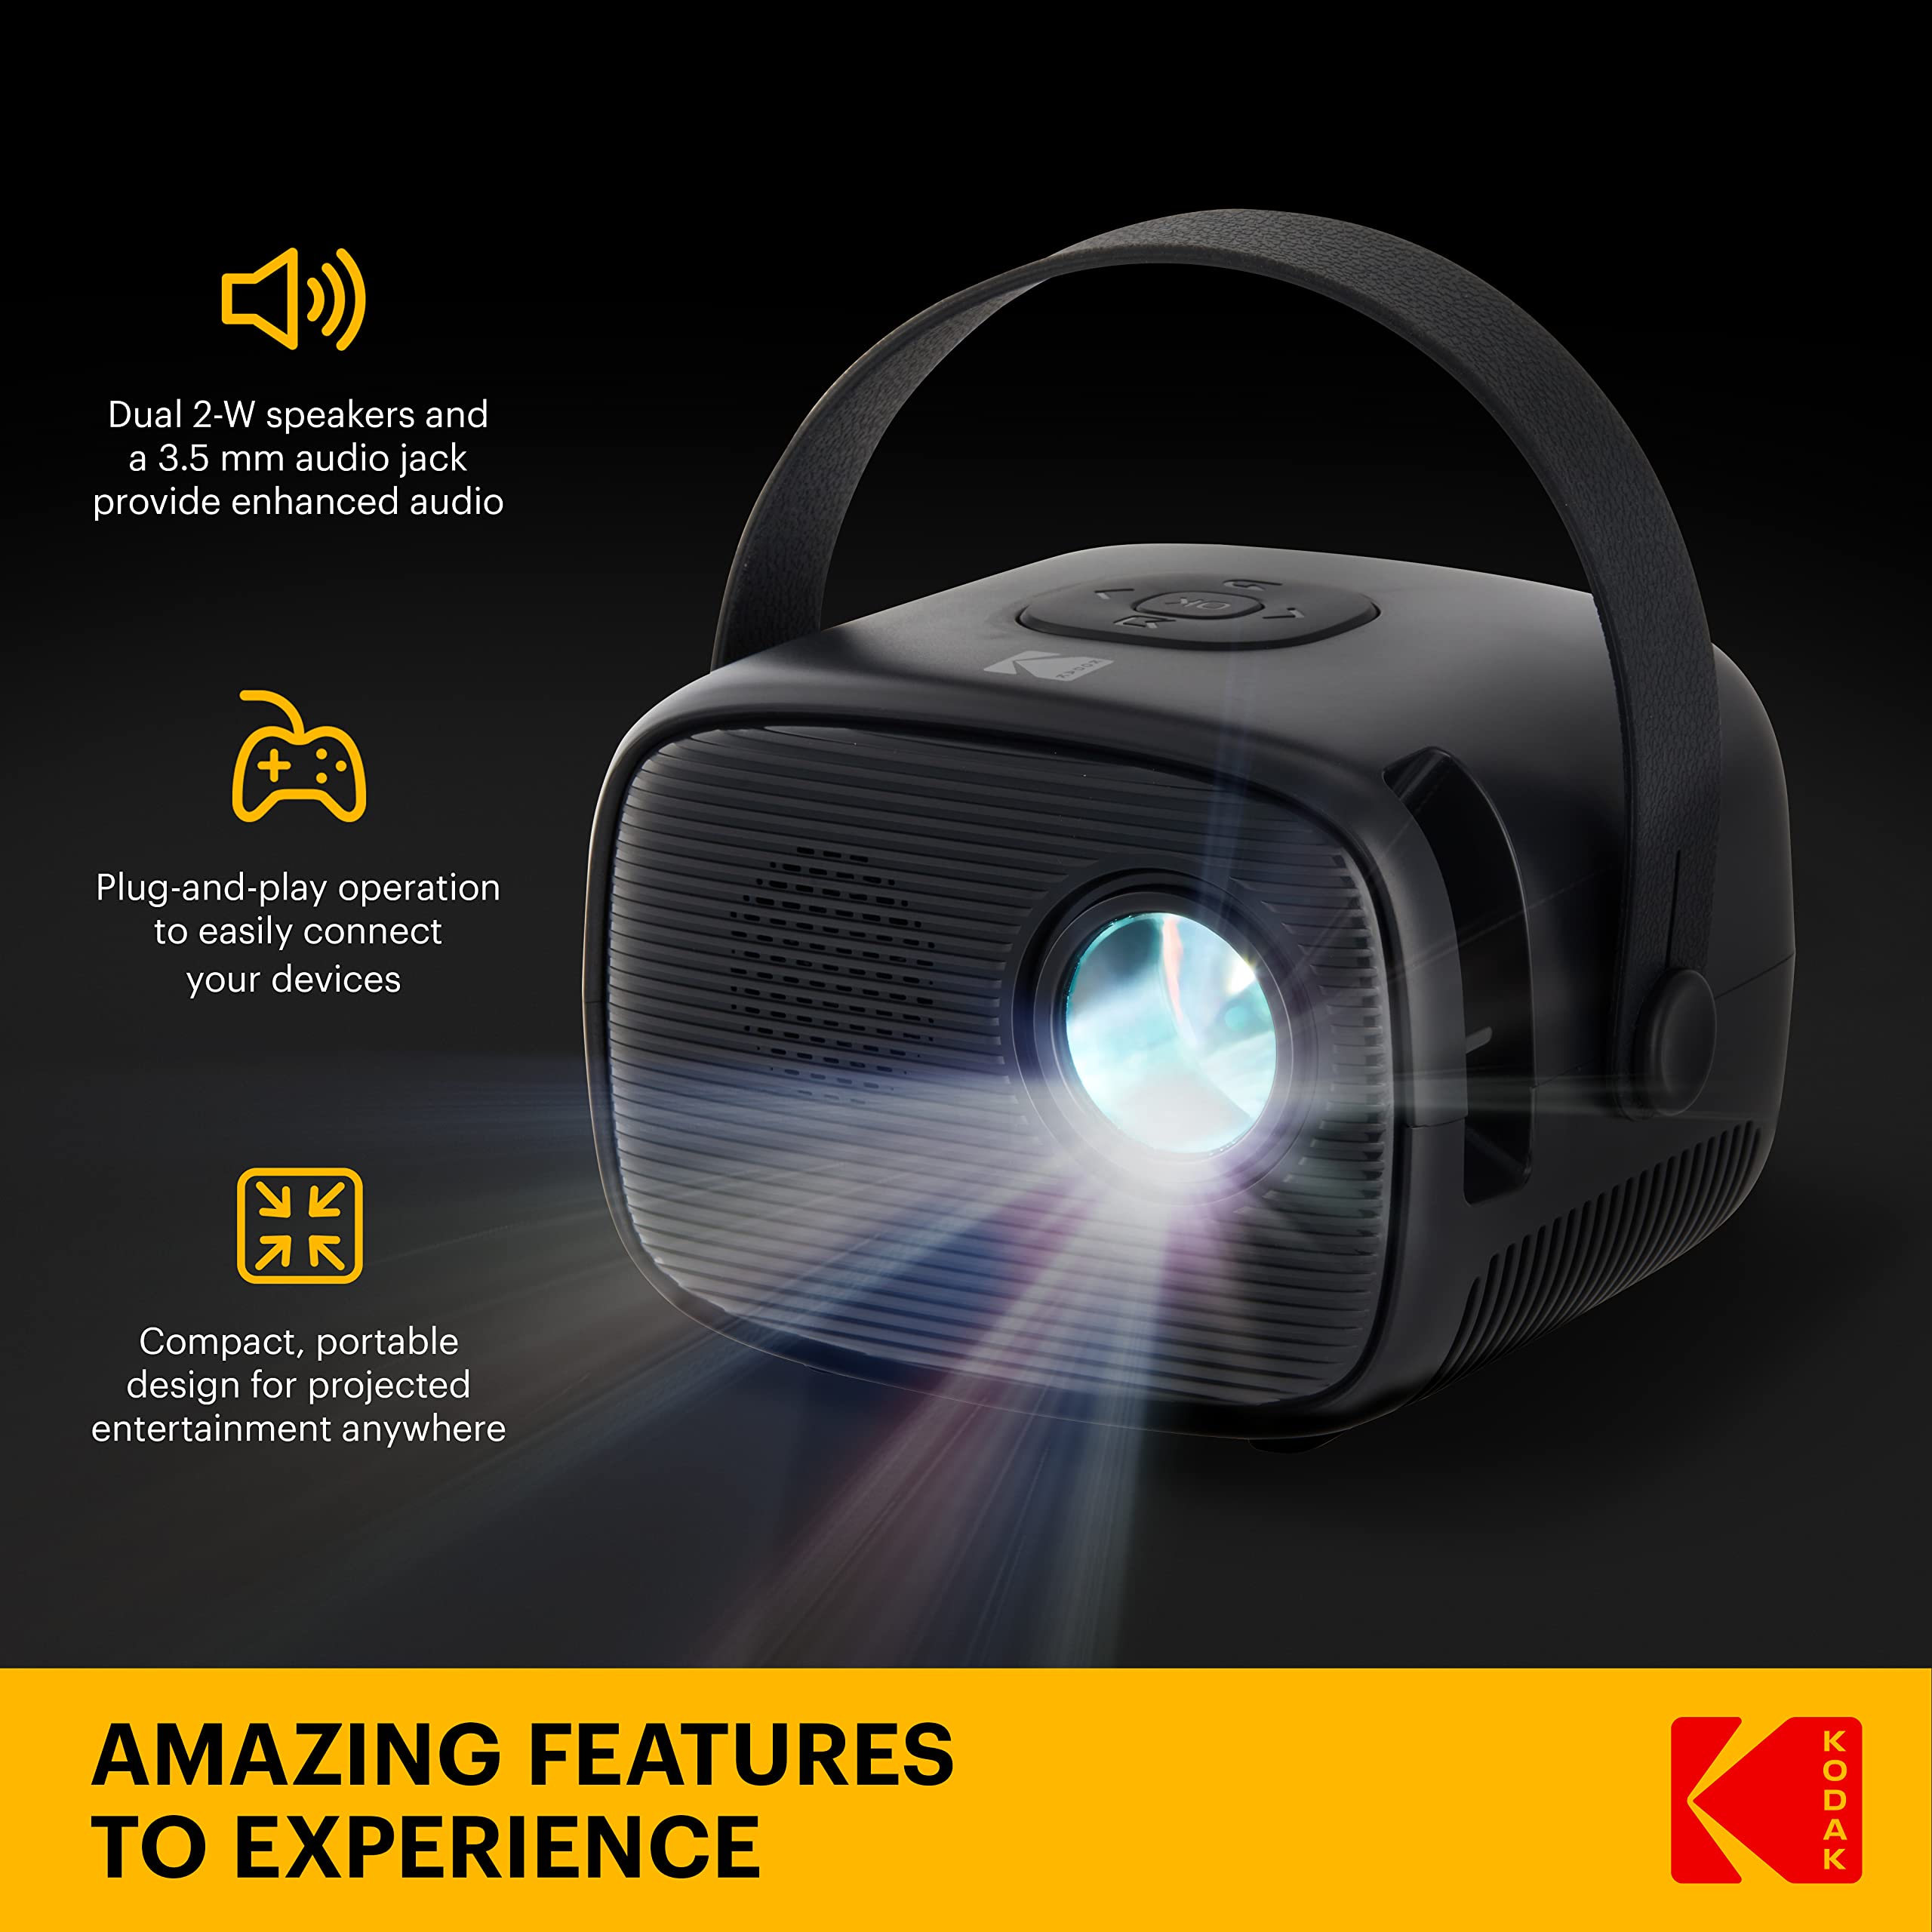 KODAK FLIK X2 Mini Pico Projector | Portable 100” Projector with Remote Control, Speakers & Carry Handle Plays Movies, TV & Games | Compatible with HDMI, USB, AV, MicroSD, Smartphone, Firestick, Black